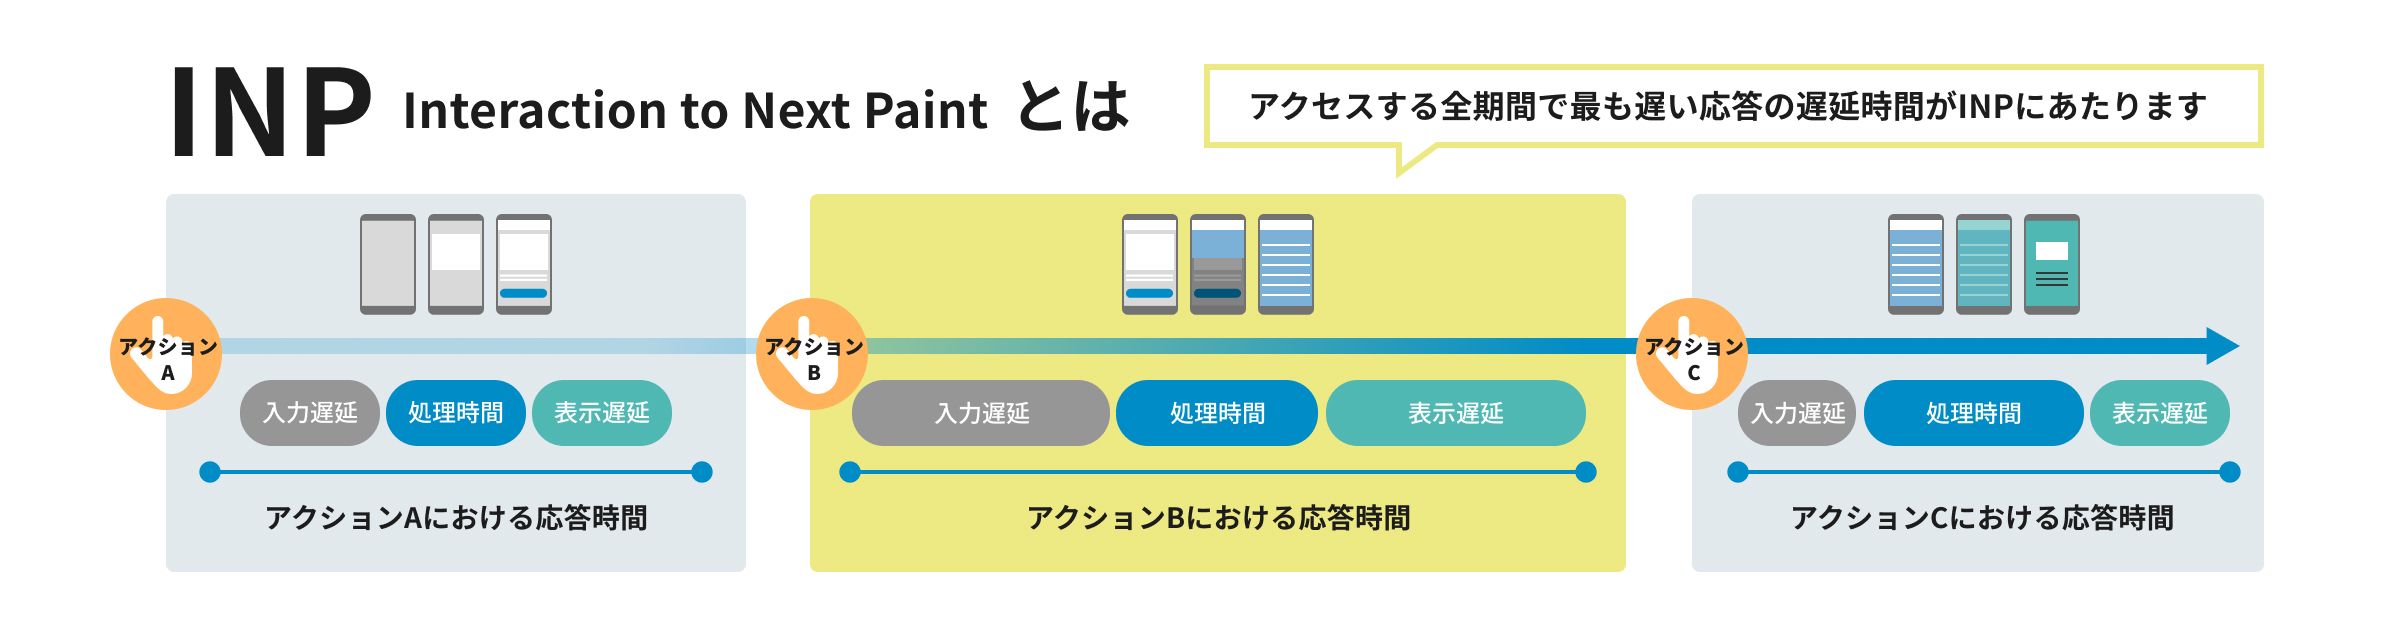 INP Interaction to Next Paint とは